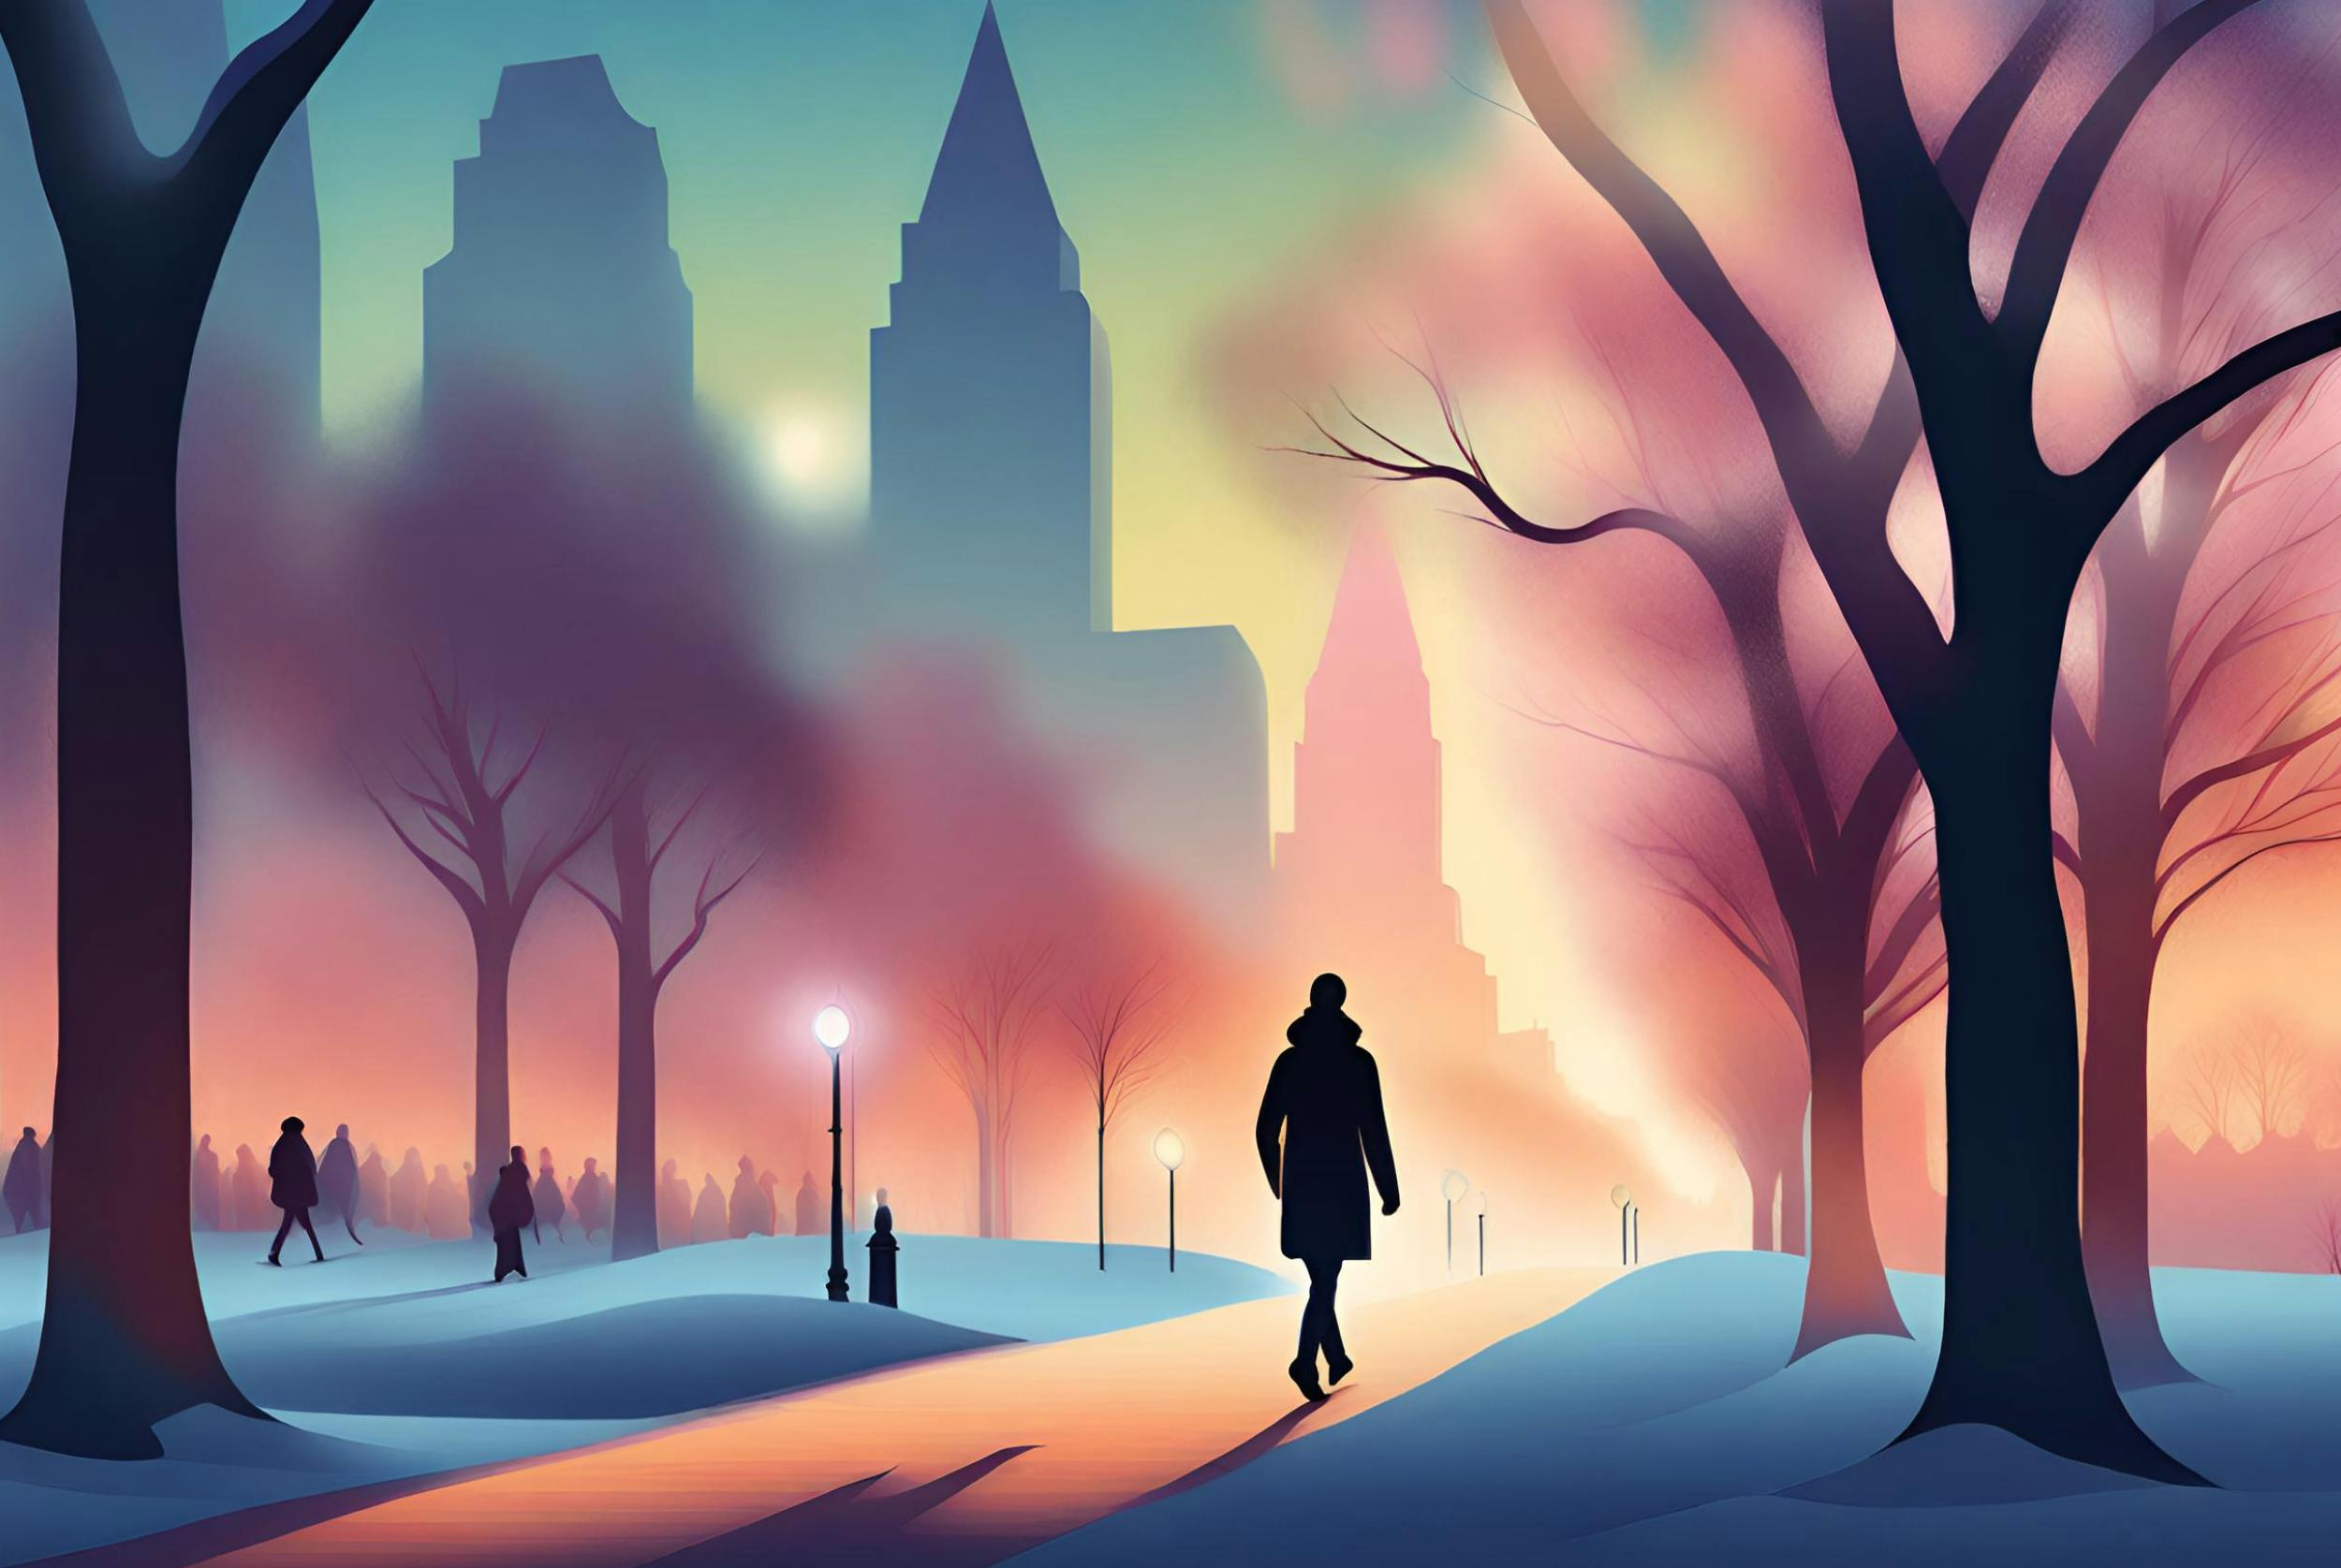 Illustration of people walking in a city park in winter